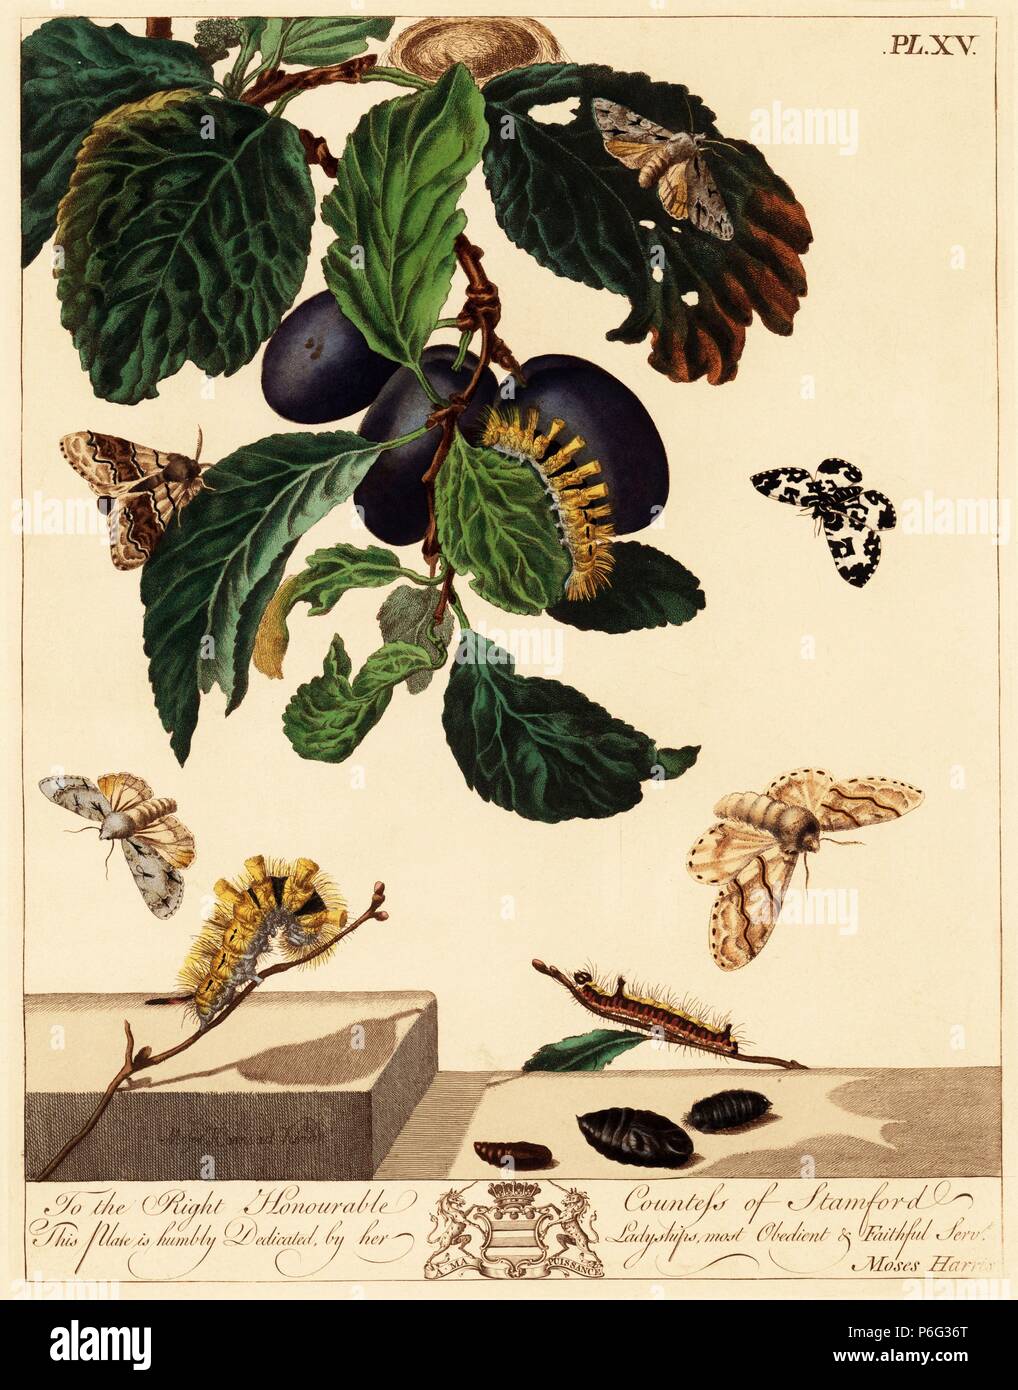 Yellow or pale tussock moth, Calliteara pudibunda, grey dagger moth, Acronicta psi, and argent and sable moth, Rheumaptera hastata, on a plum branch, Prunus domestica. Handcoloured lithograph after an illustration by Moses Harris from 'The Aurelian; a Natural History of English Moths and Butterflies,' new edition edited by J. O. Westwood, published by Henry Bohn, London, 1840. Stock Photo